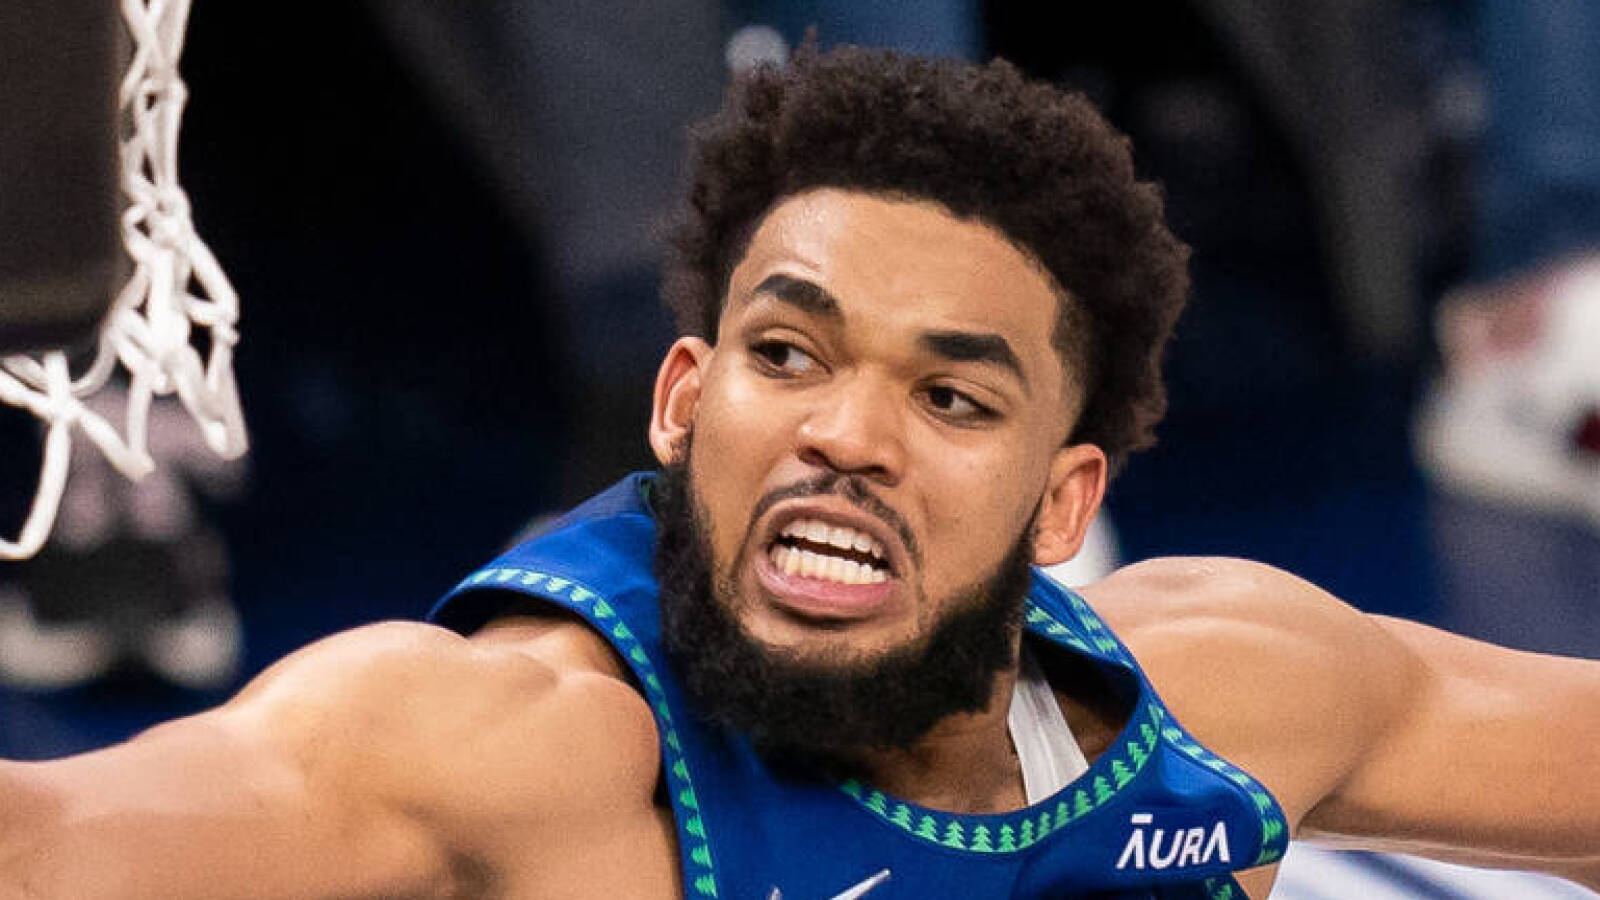 Karl-Anthony Towns reveals he had recent health scare